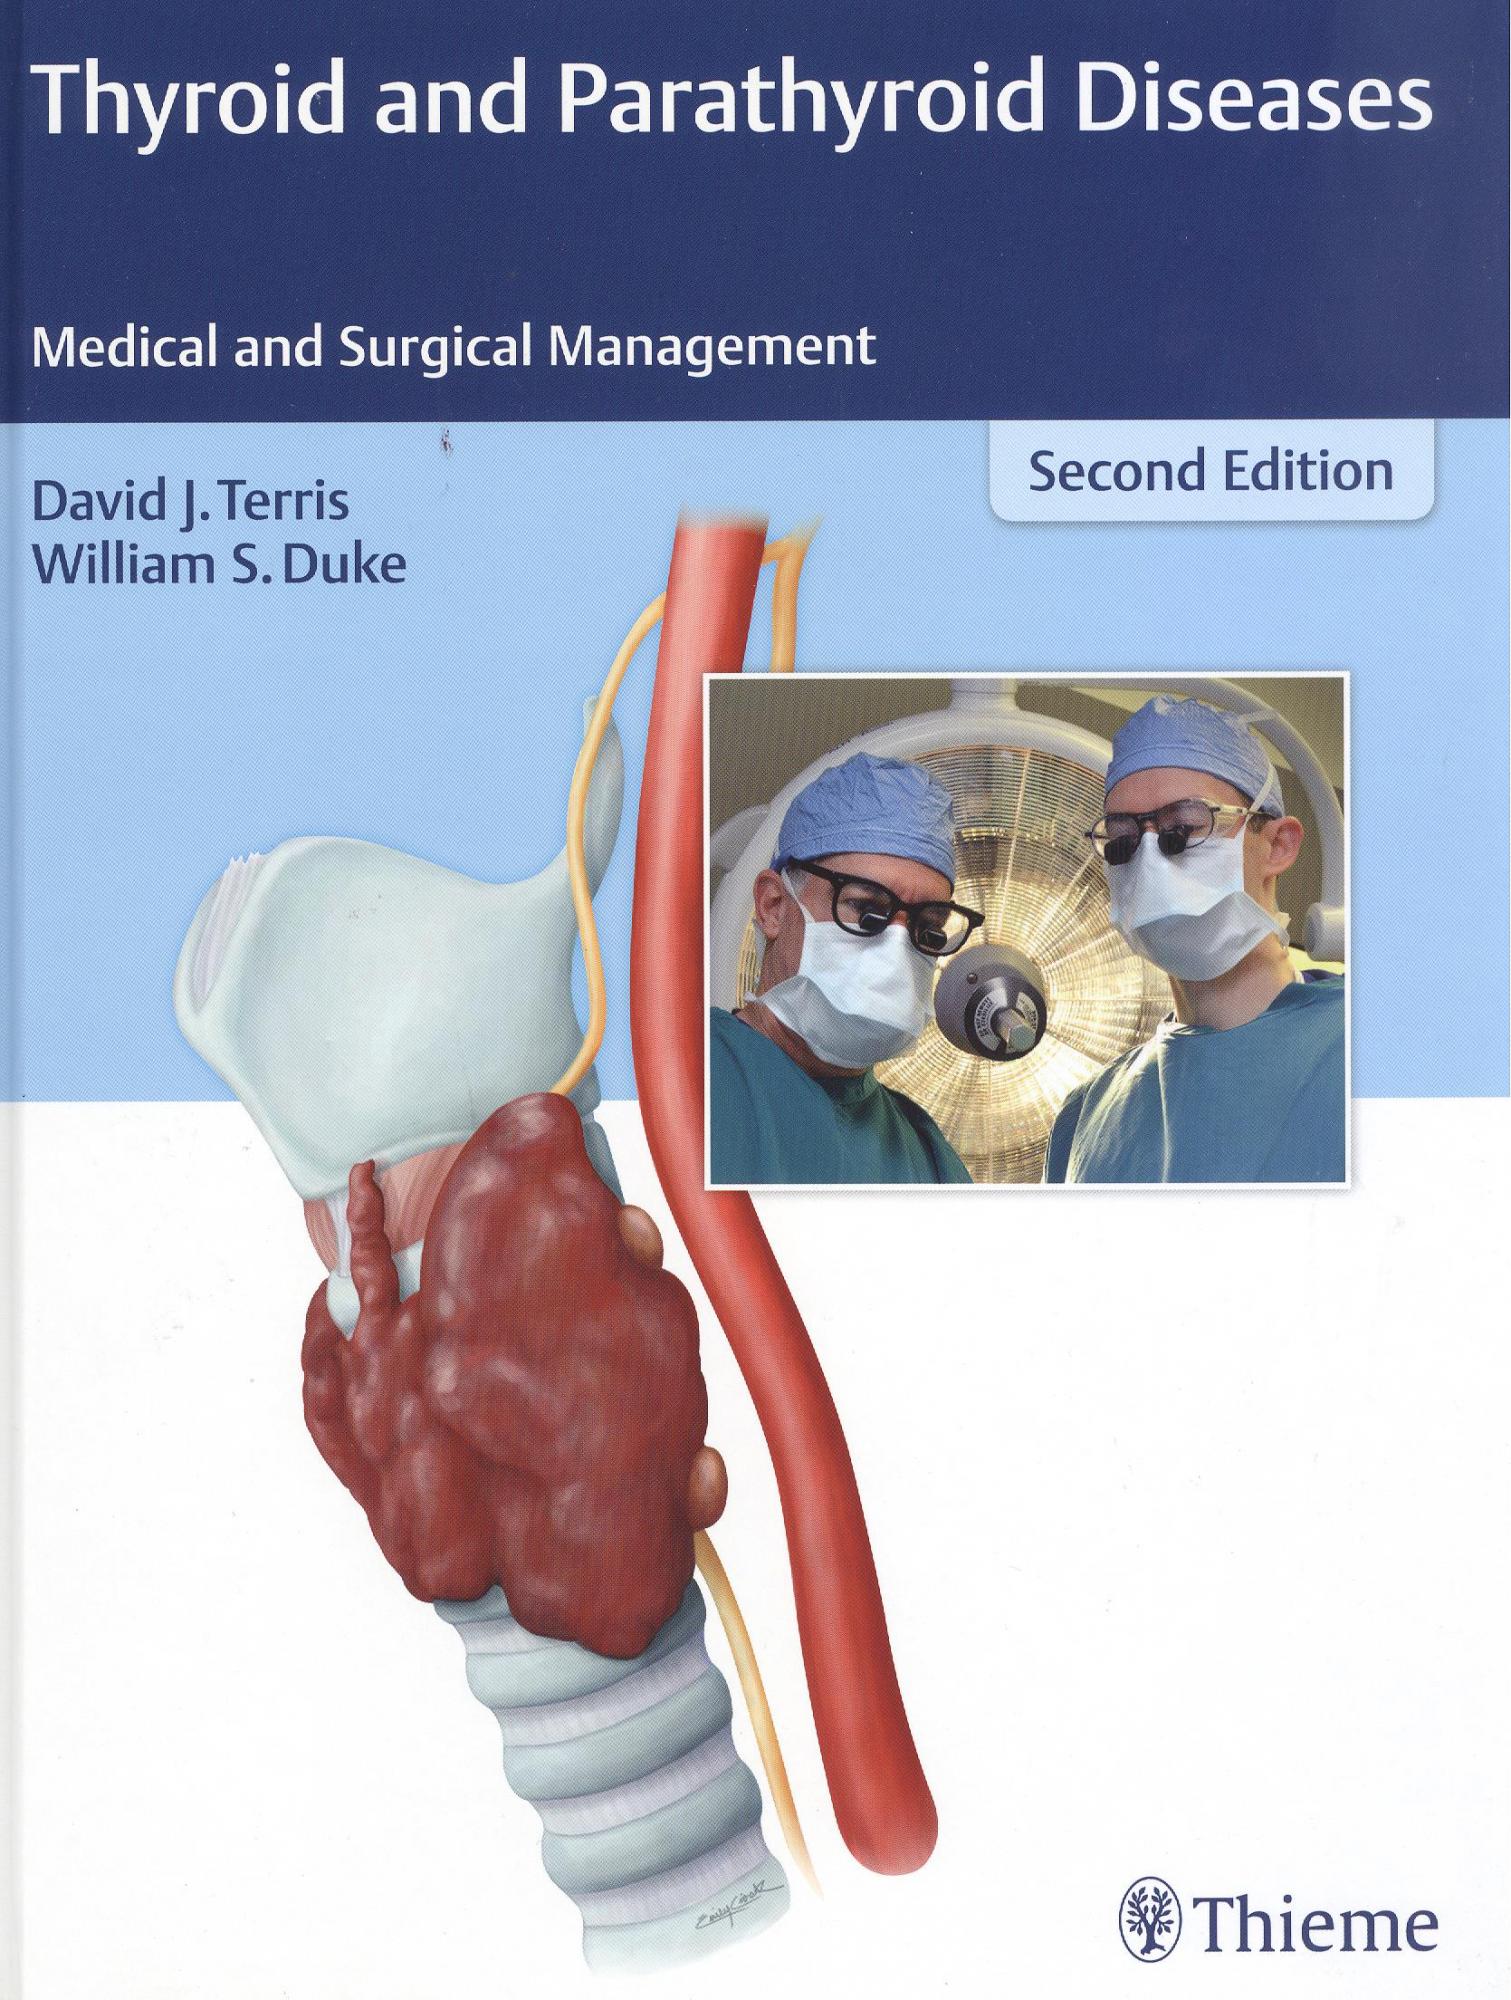 Thyroid and Parathyroid Diseases: Medical and Surgical Management, 2nd ed